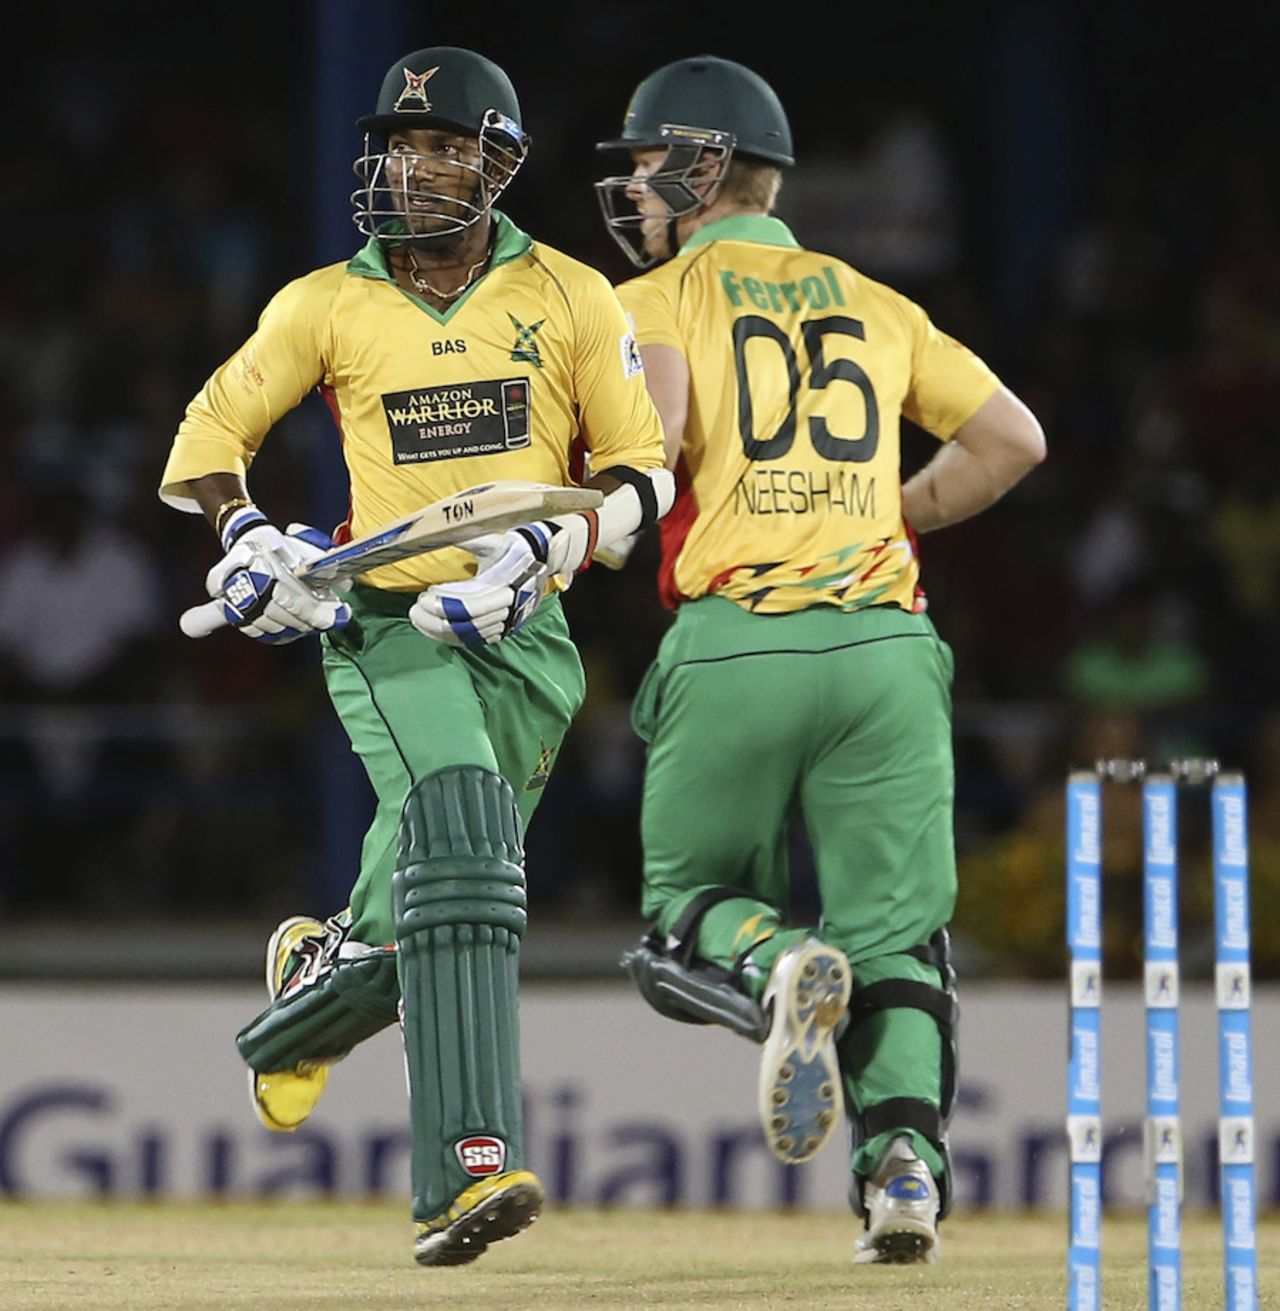 Denesh Ramdin and Jimmy Neesham added 122 for the fourth wicket, Trinidad & Tobago Red Steel v Guyana Amazon Warriors, CPL 2014, Port-of-Spain, July 24, 2014